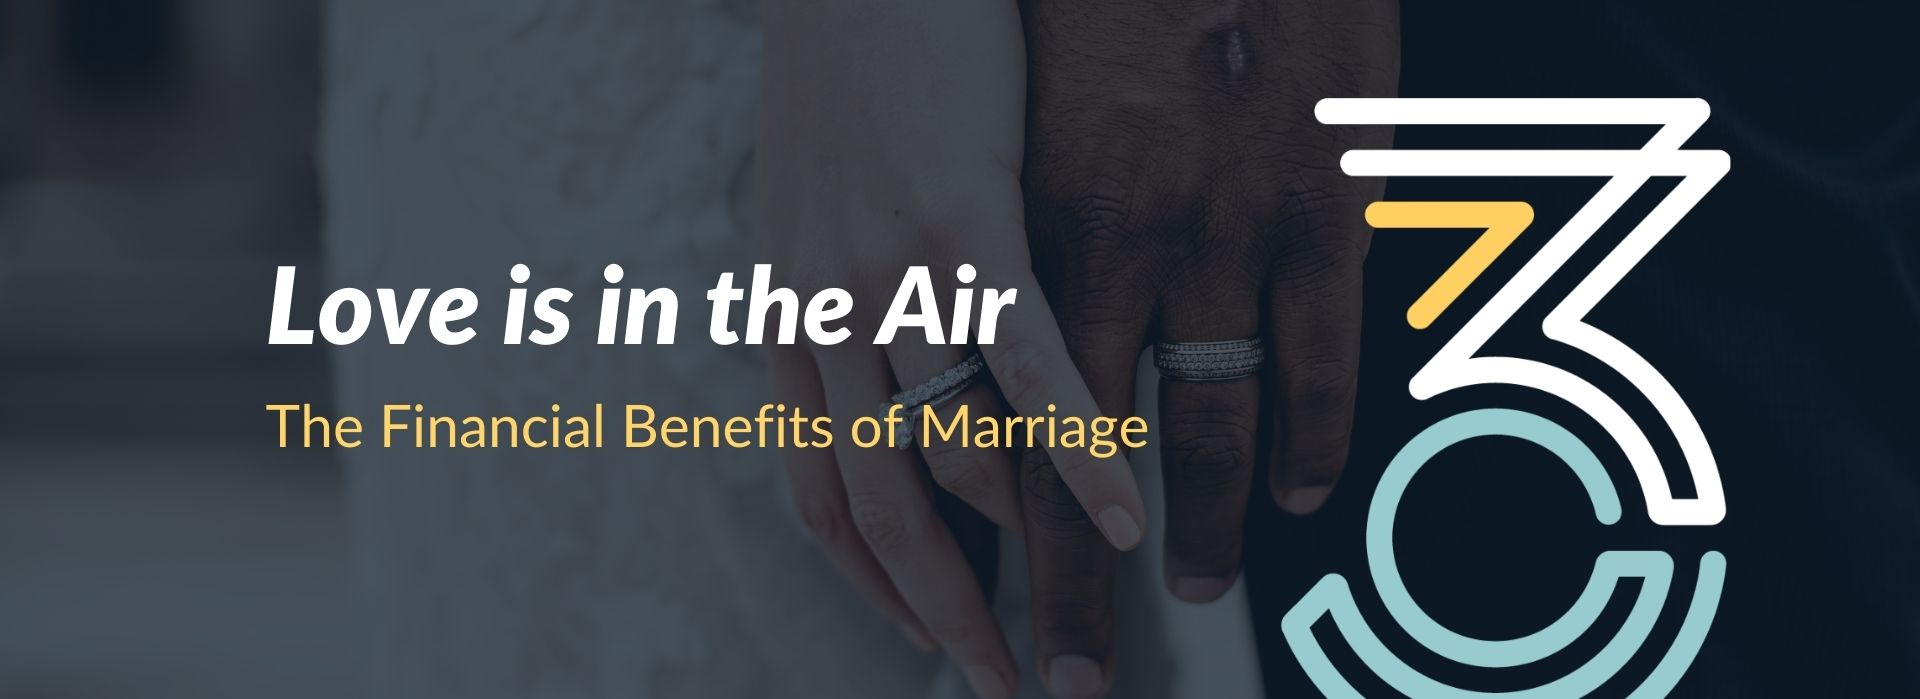 LOVE IS IN THE AIR - THE FINANCIAL BENEFITS OF MARRIAGE